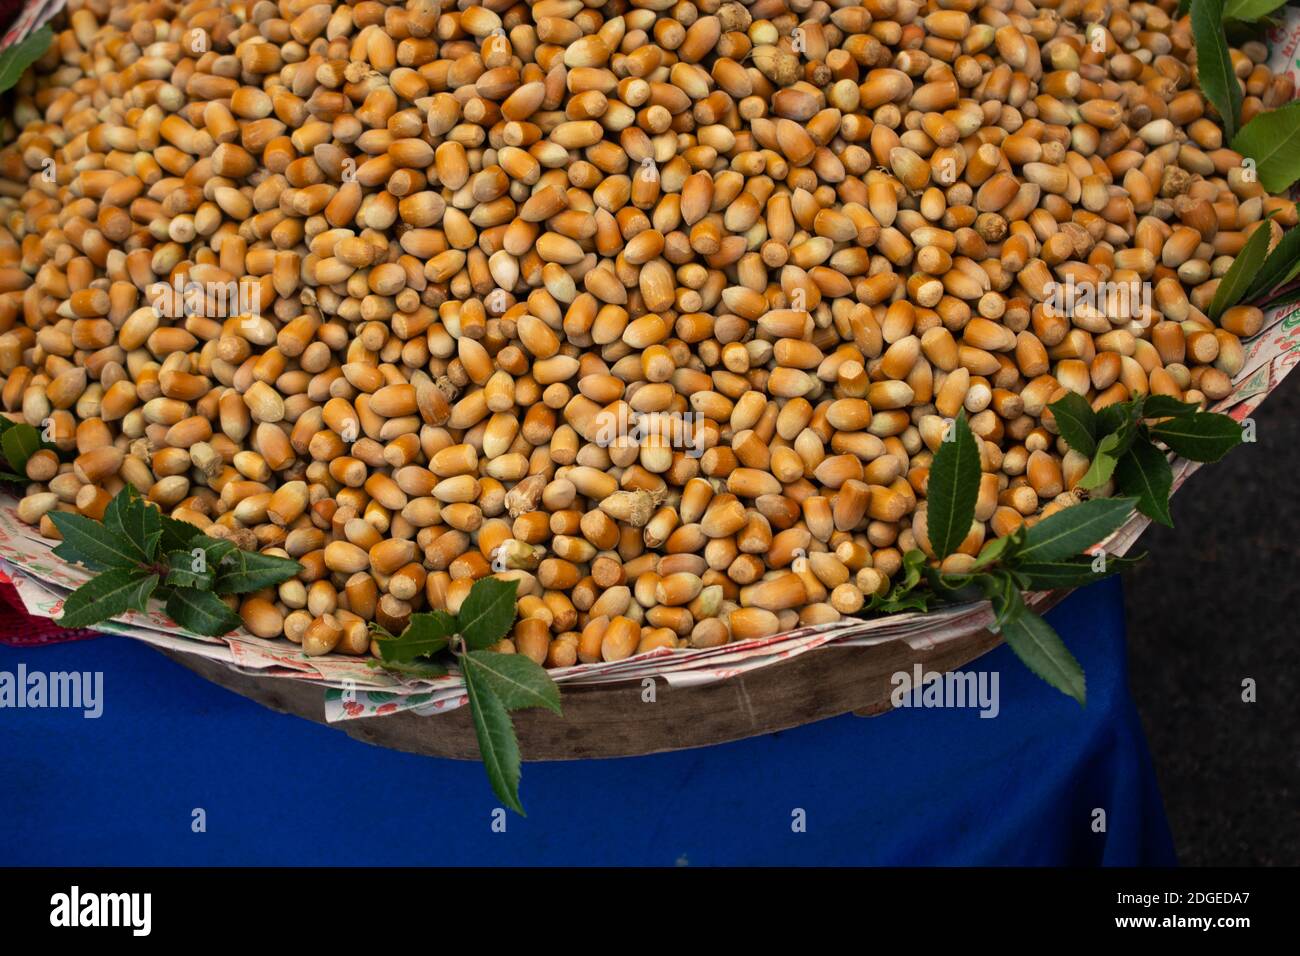 Ripe unshelled hazelnuts  as nut  background in view Stock Photo